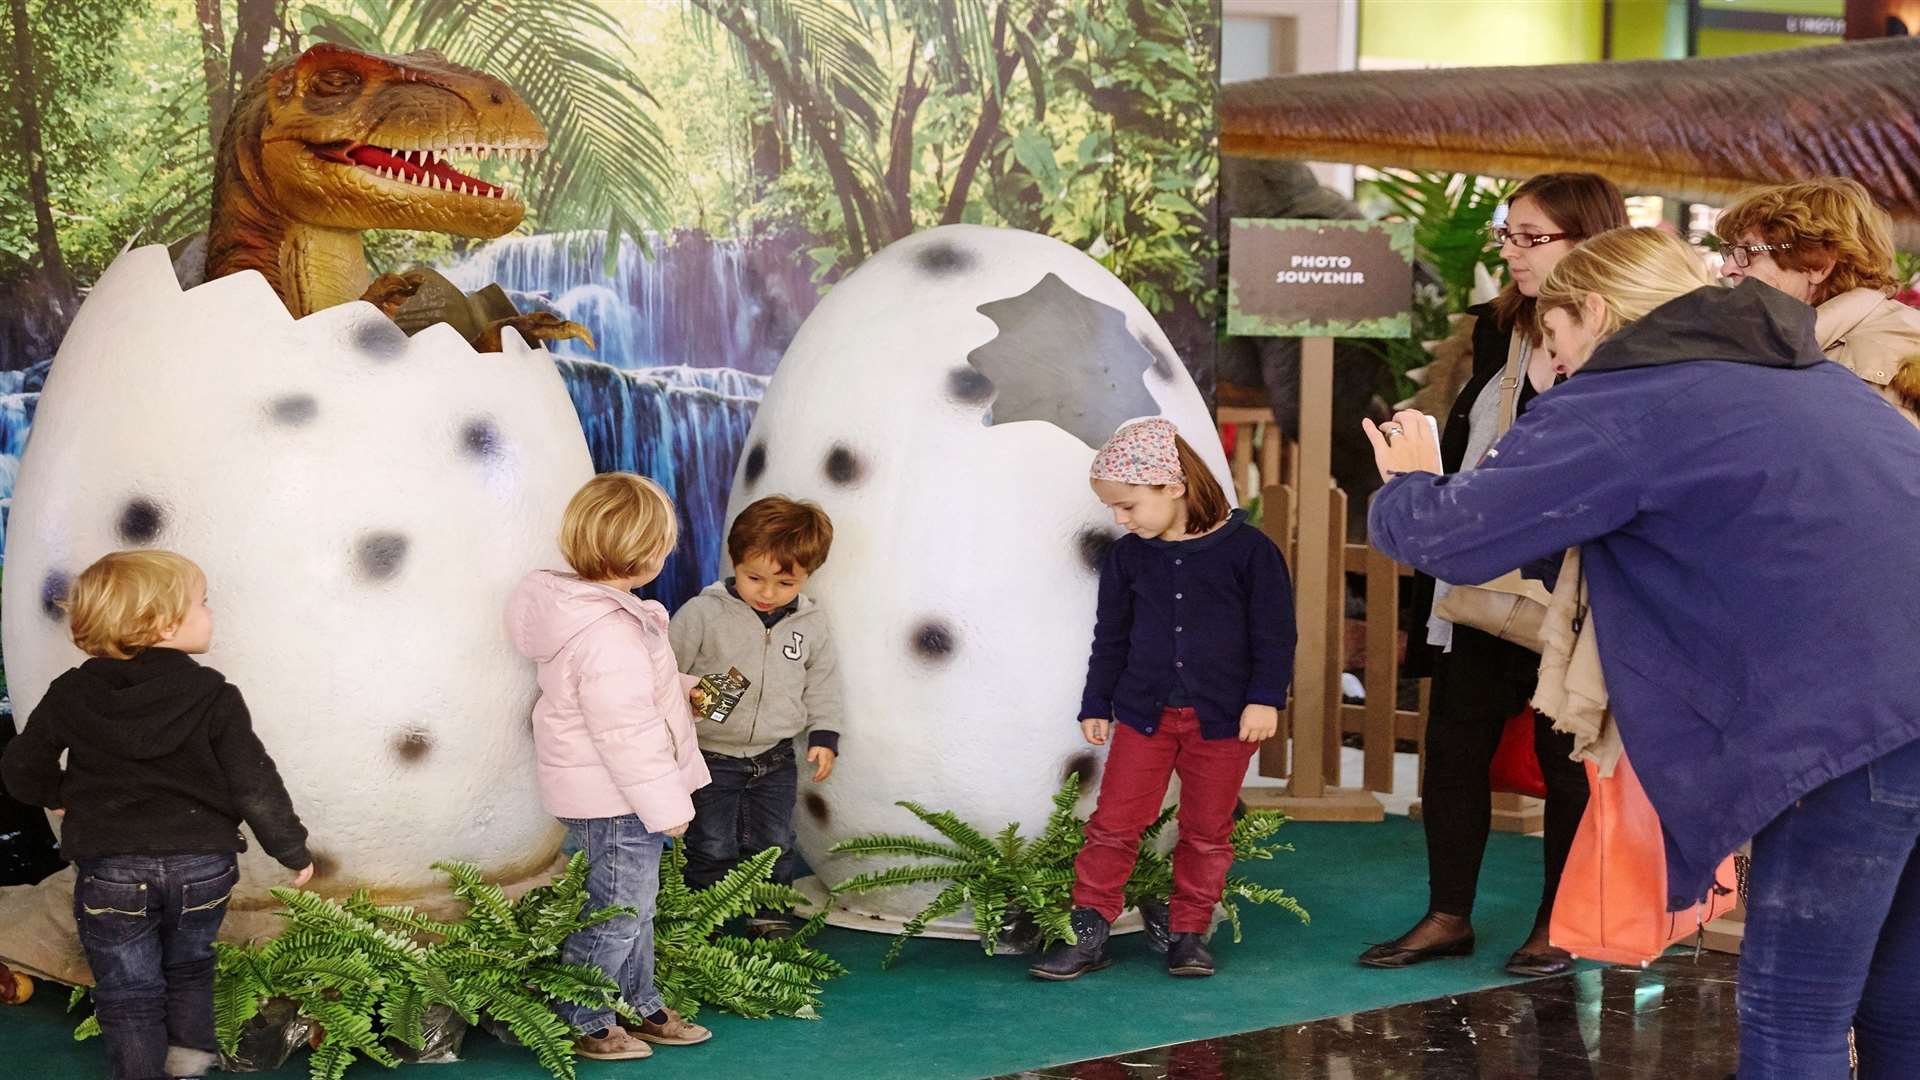 Children can have a picture taken with a baby dino